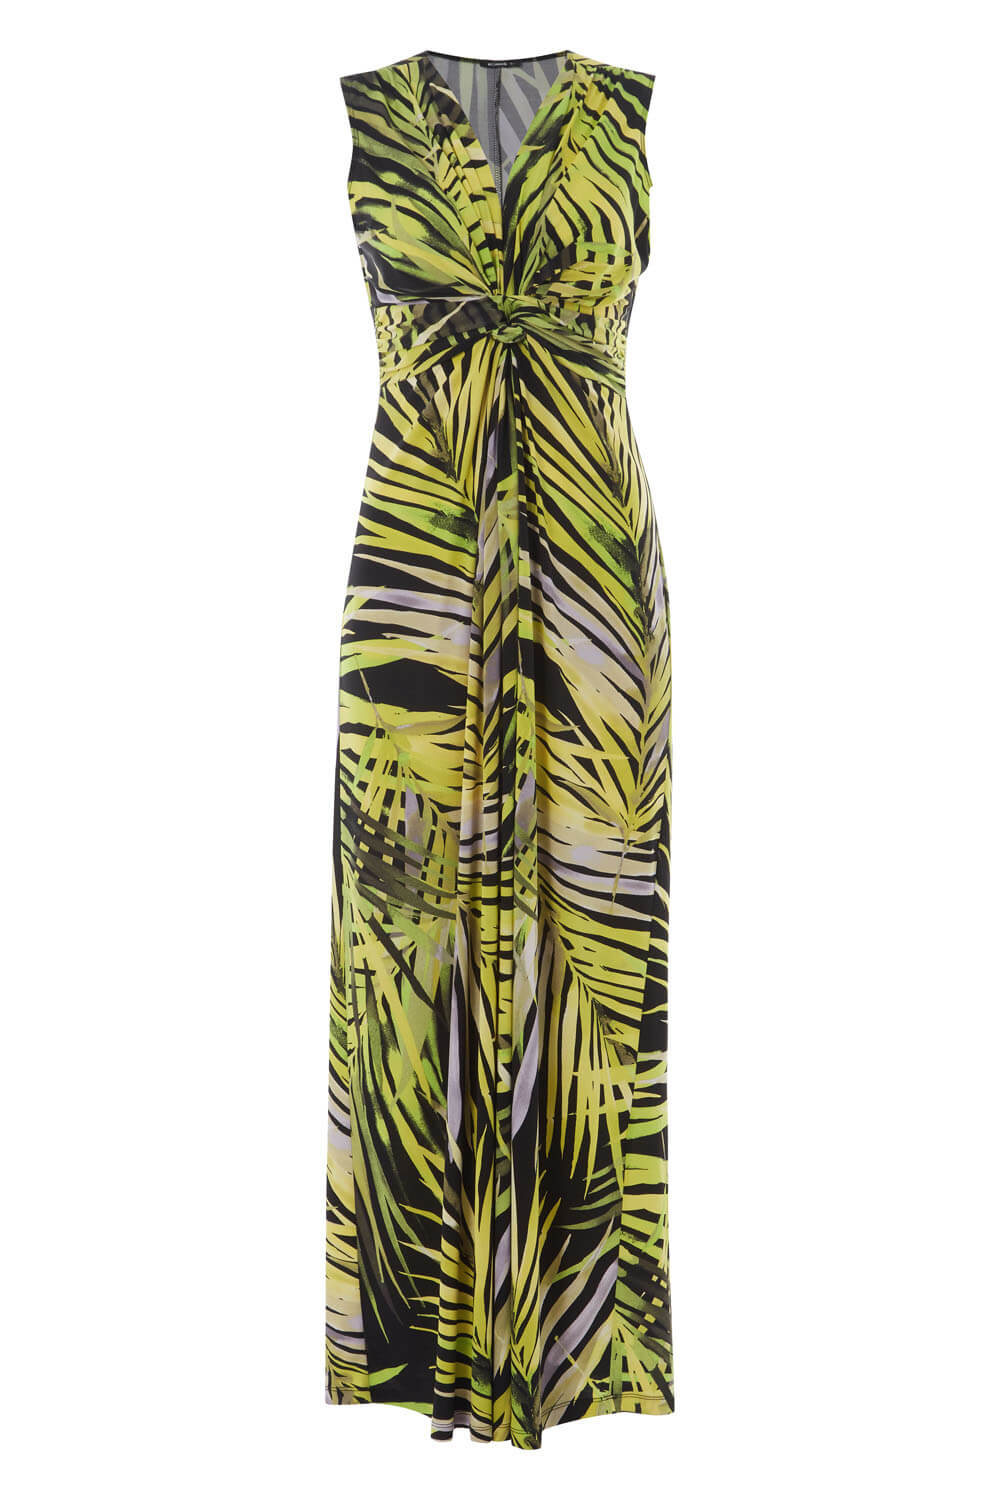 Lime Palm Print Twist Front Maxi Dress, Image 4 of 4